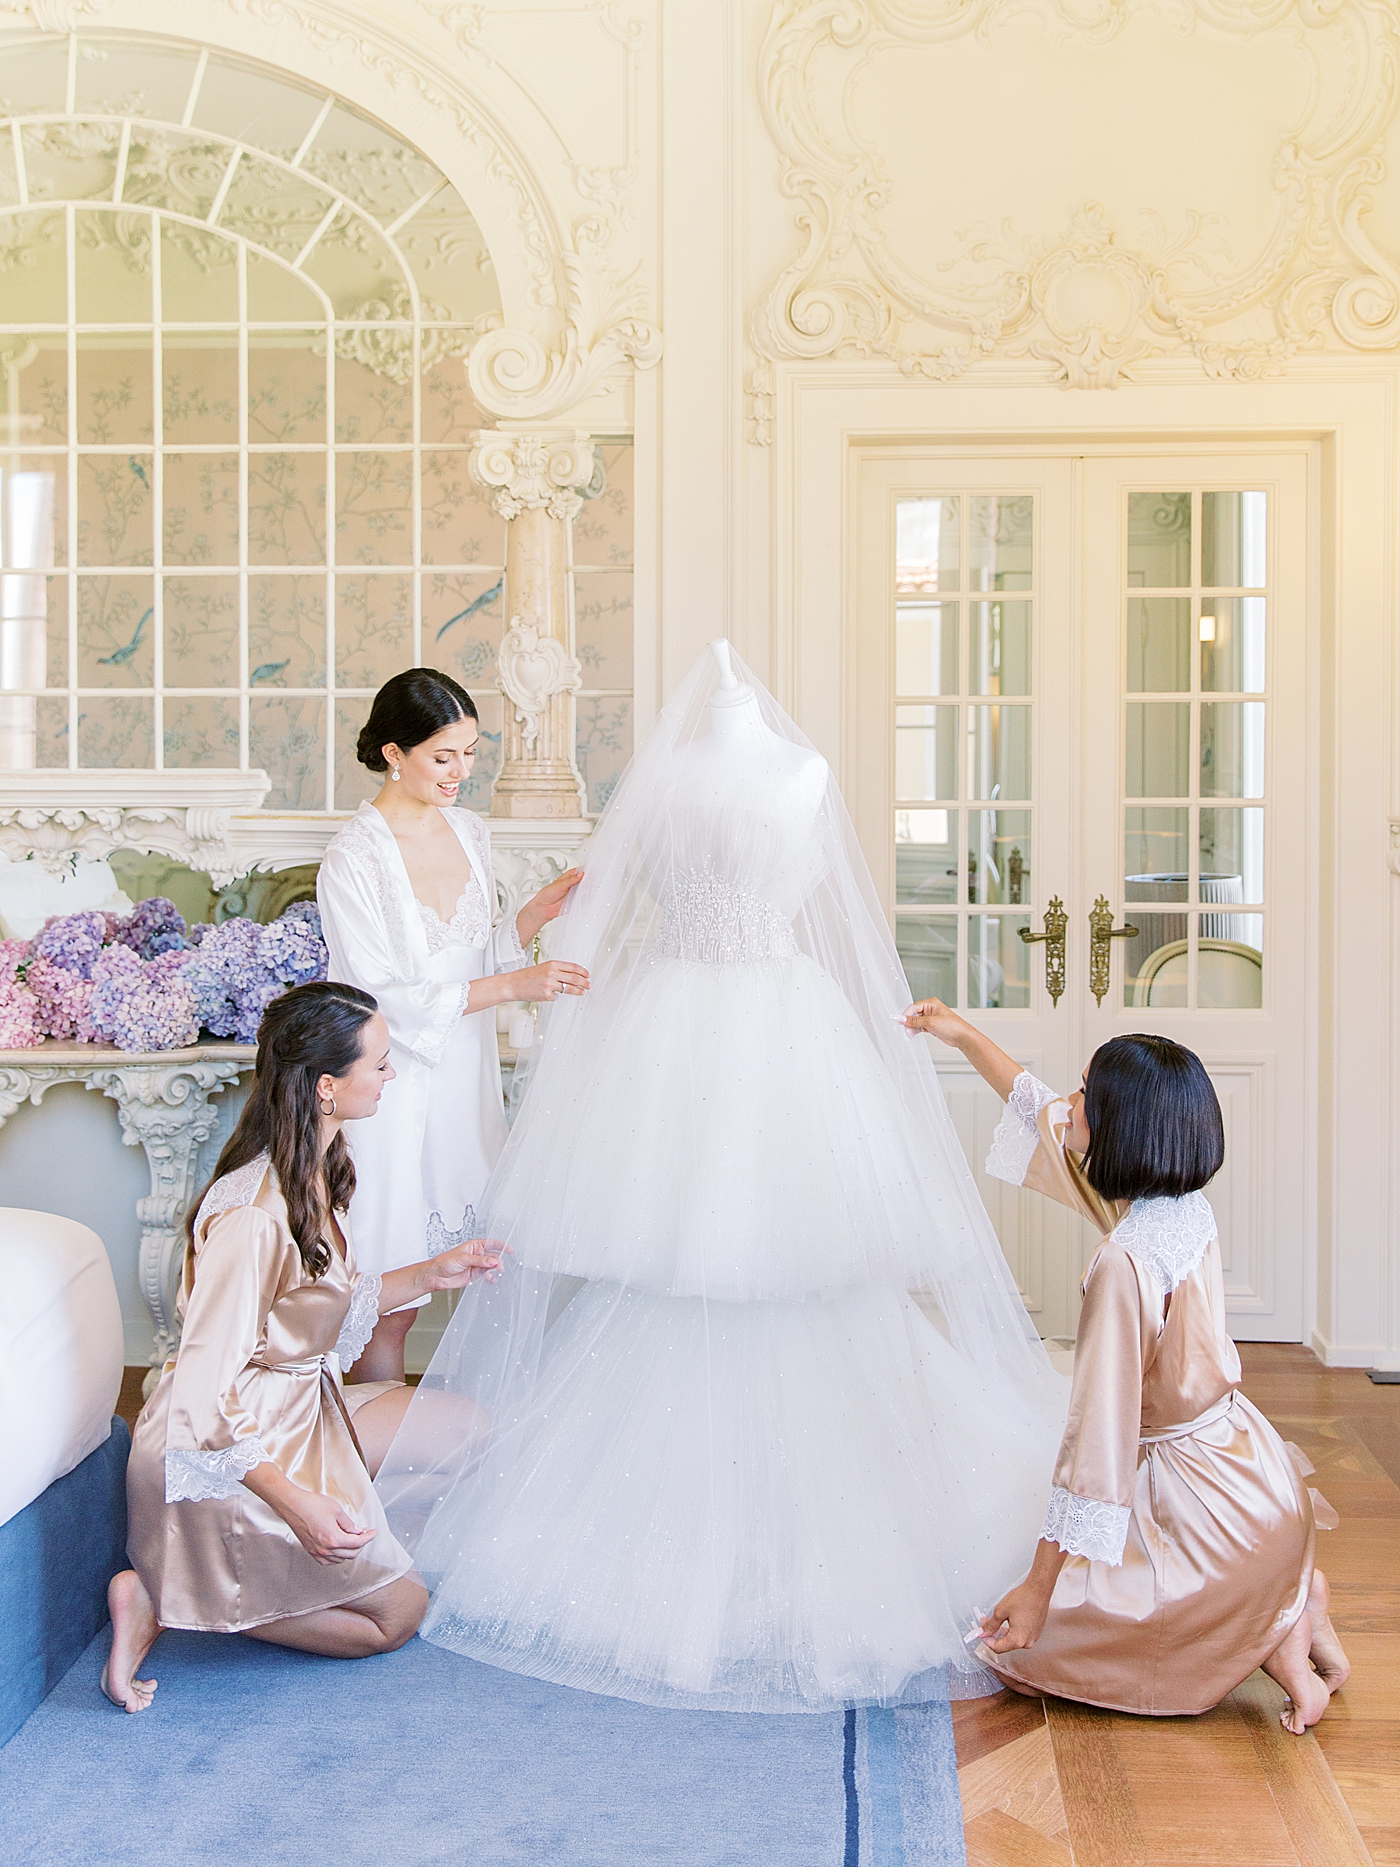 Bride and bridesmaids adjusting brides dress in getting ready room | Image by Diane Sotero 